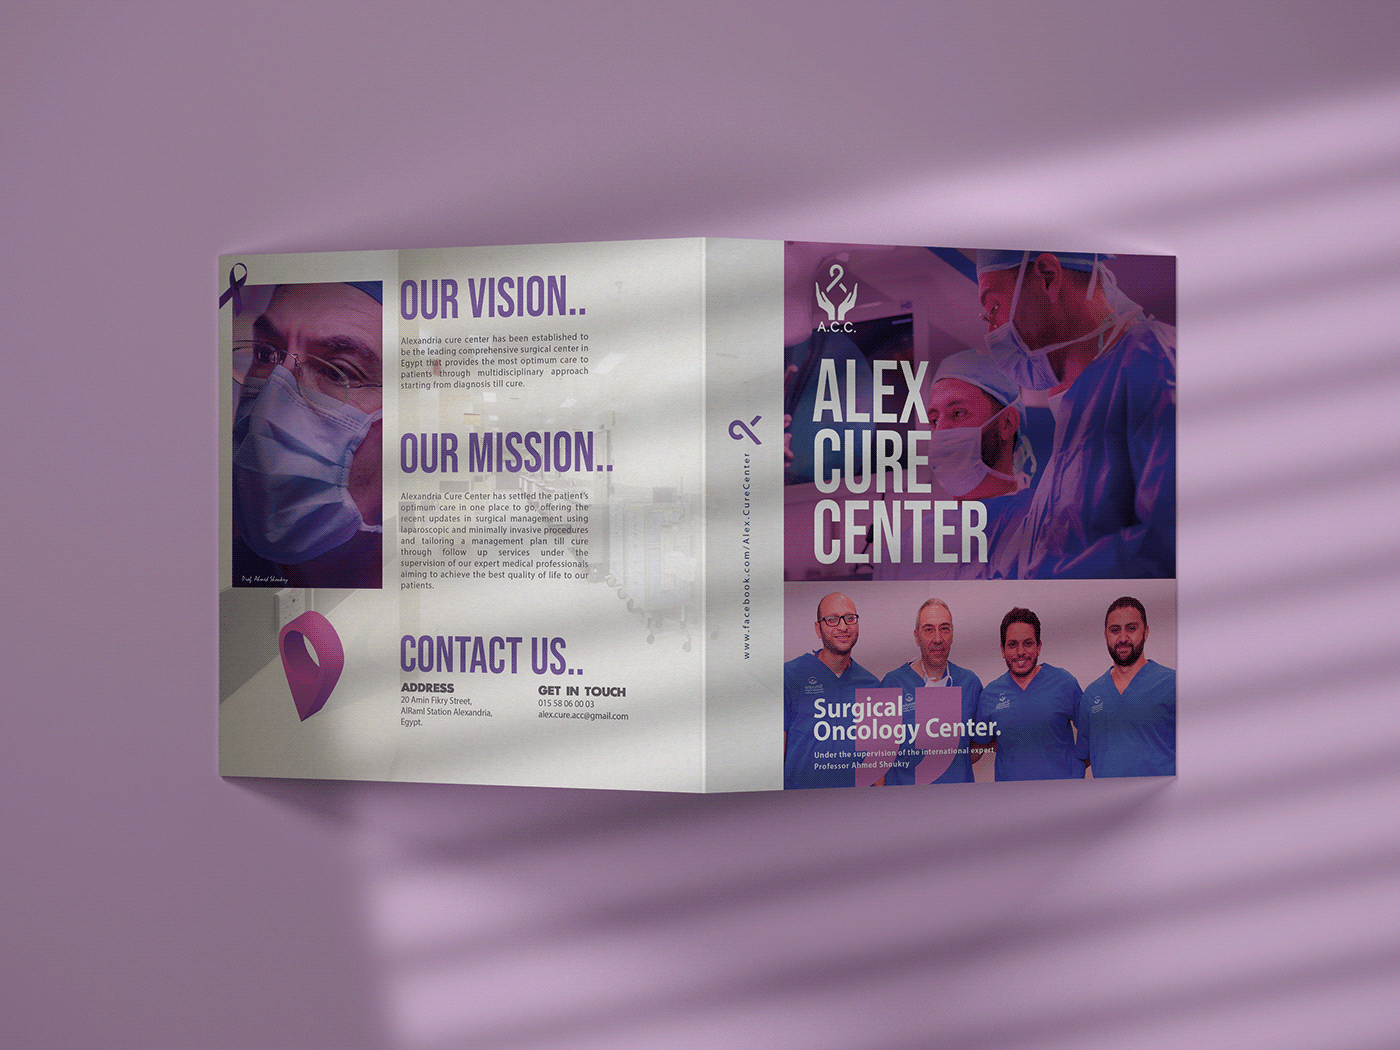 Booklet cancer clinic doctor hospital Marklinica medical center Oncology surgeon surgical oncology